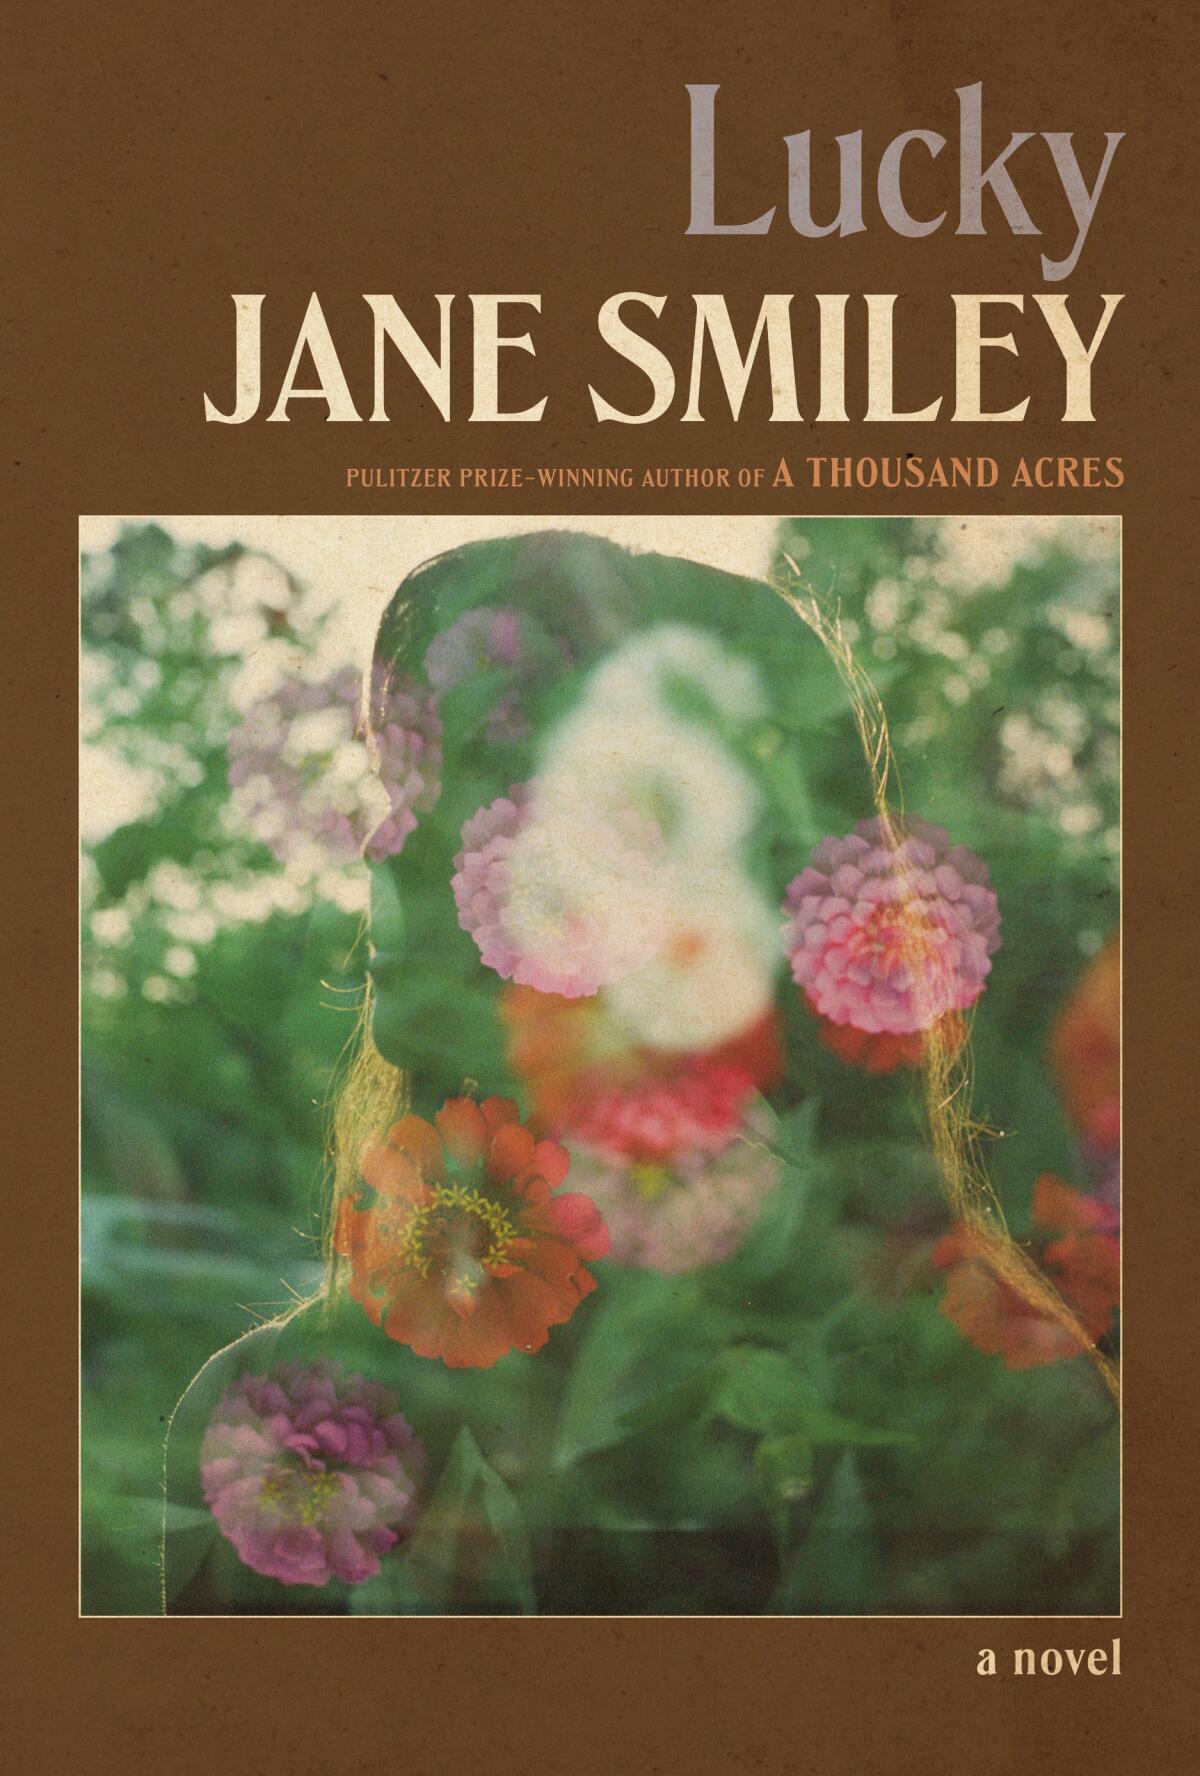 Book cover of "Lucky" by Jane Smiley